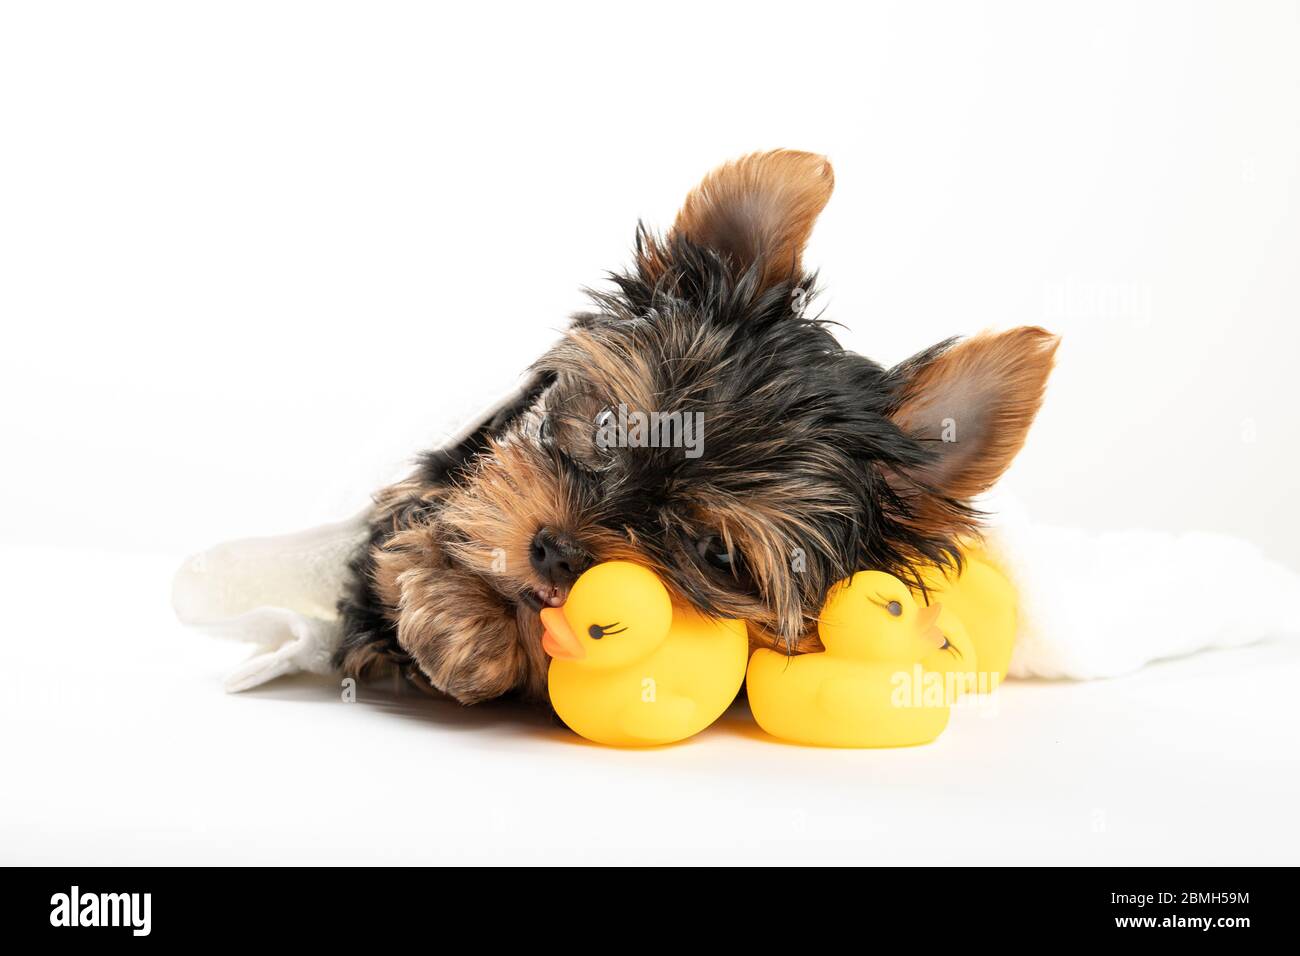 Bathing a little puppy. Yorkshire Terrier puppy in a towel with a rubber duck. Yorkshire Terrier Stock Photo